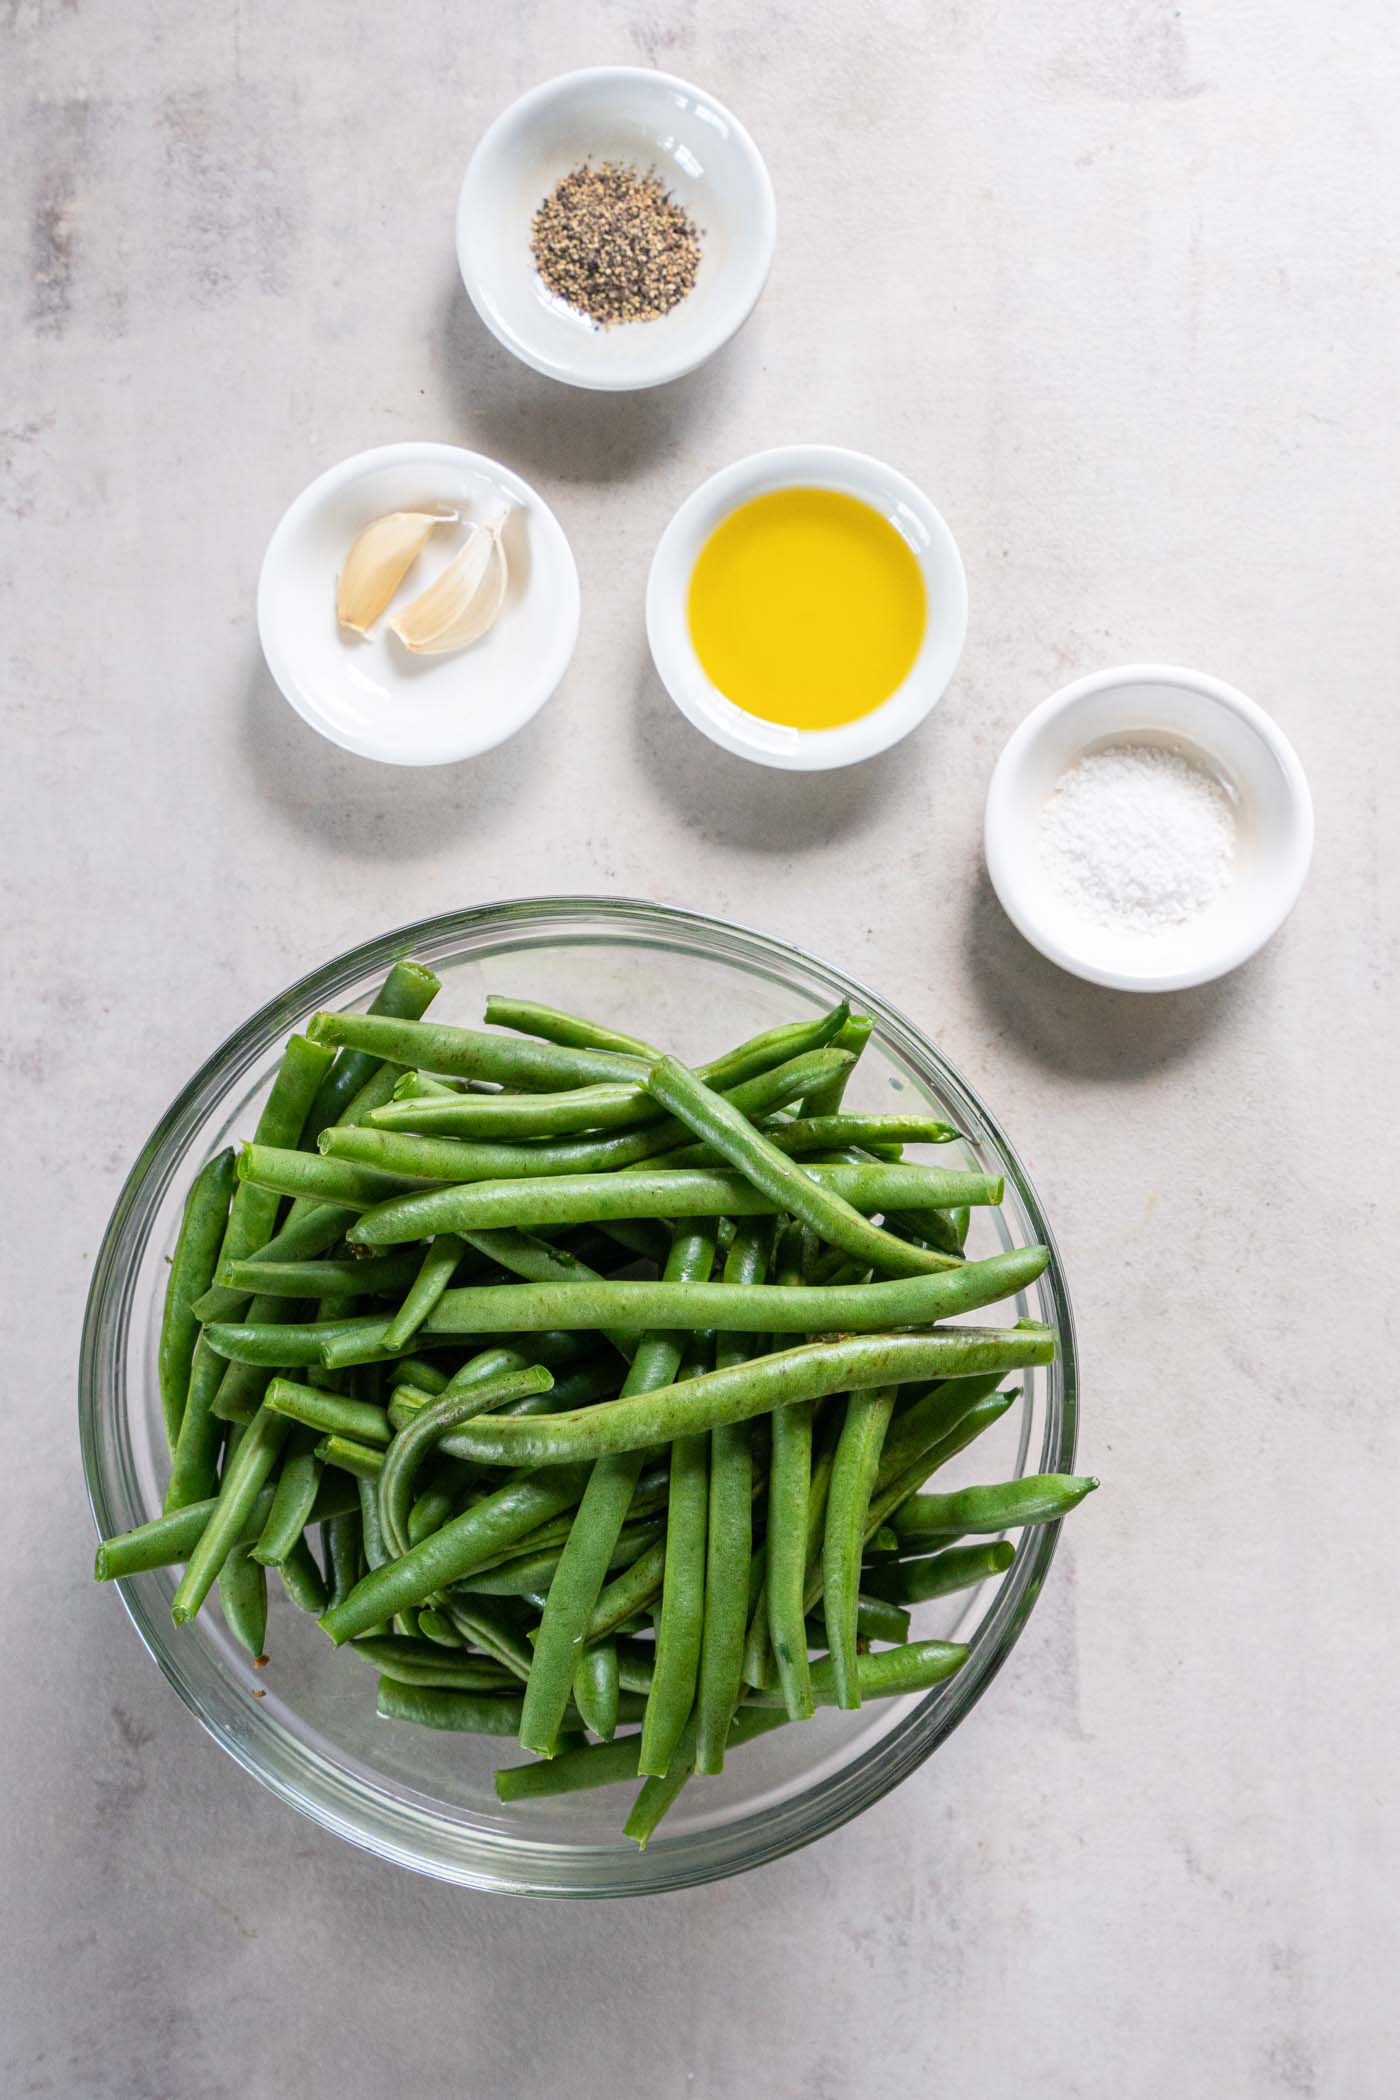 Ingredients for sauteed green beans recipe.